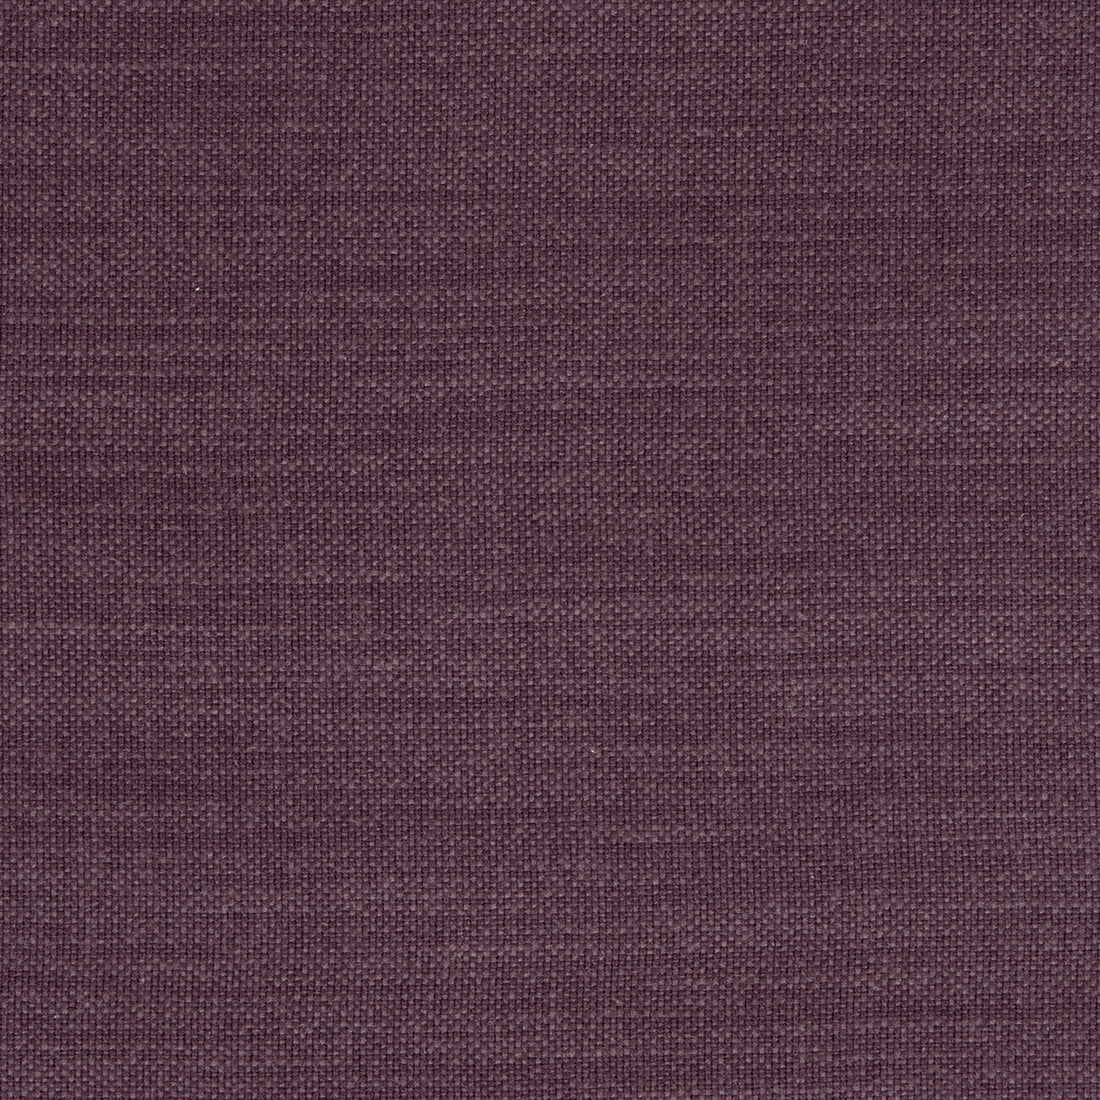 Nantucket fabric in grape color - pattern F0594/22.CAC.0 - by Clarke And Clarke in the Clarke &amp; Clarke Nantucket collection